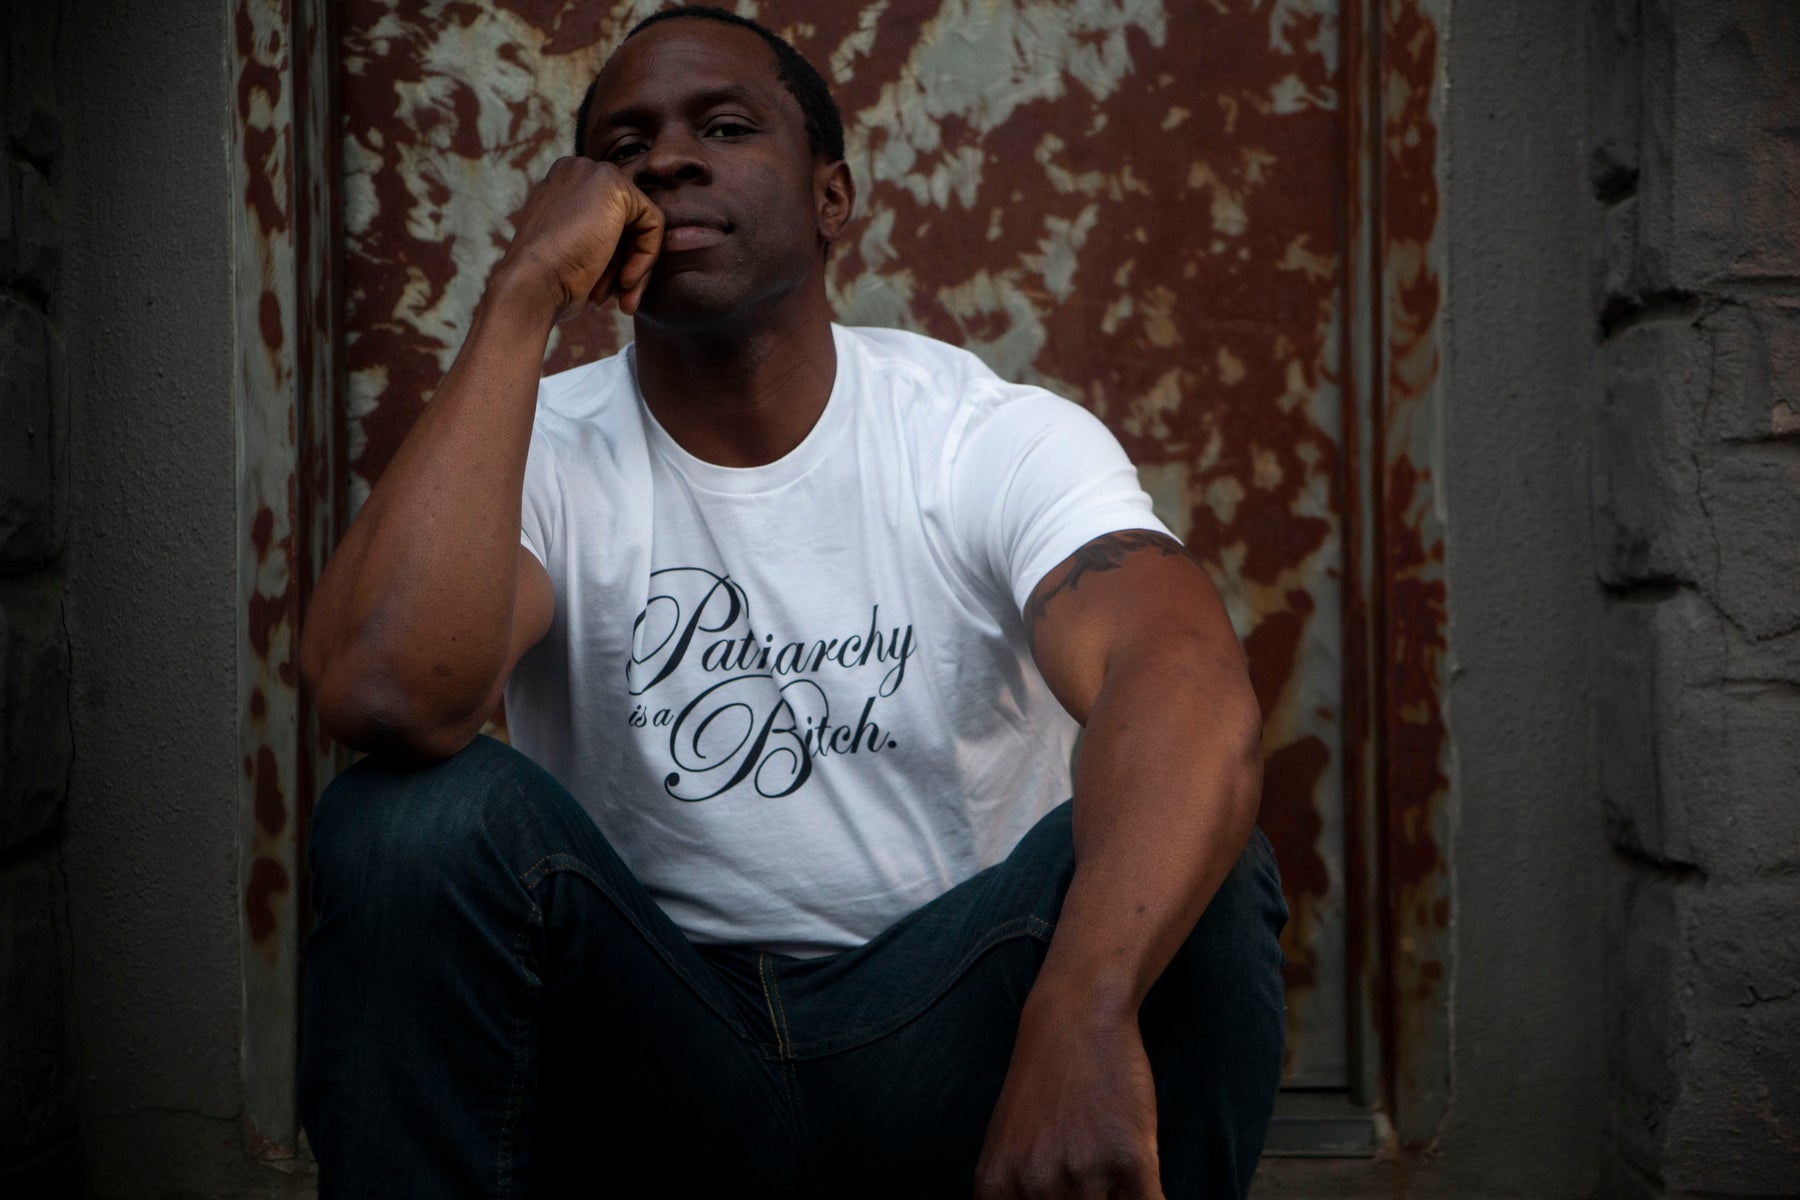 Actor and activist Gbenga Akinnagbe posts in Liberated People activism apparel white t shirt with 